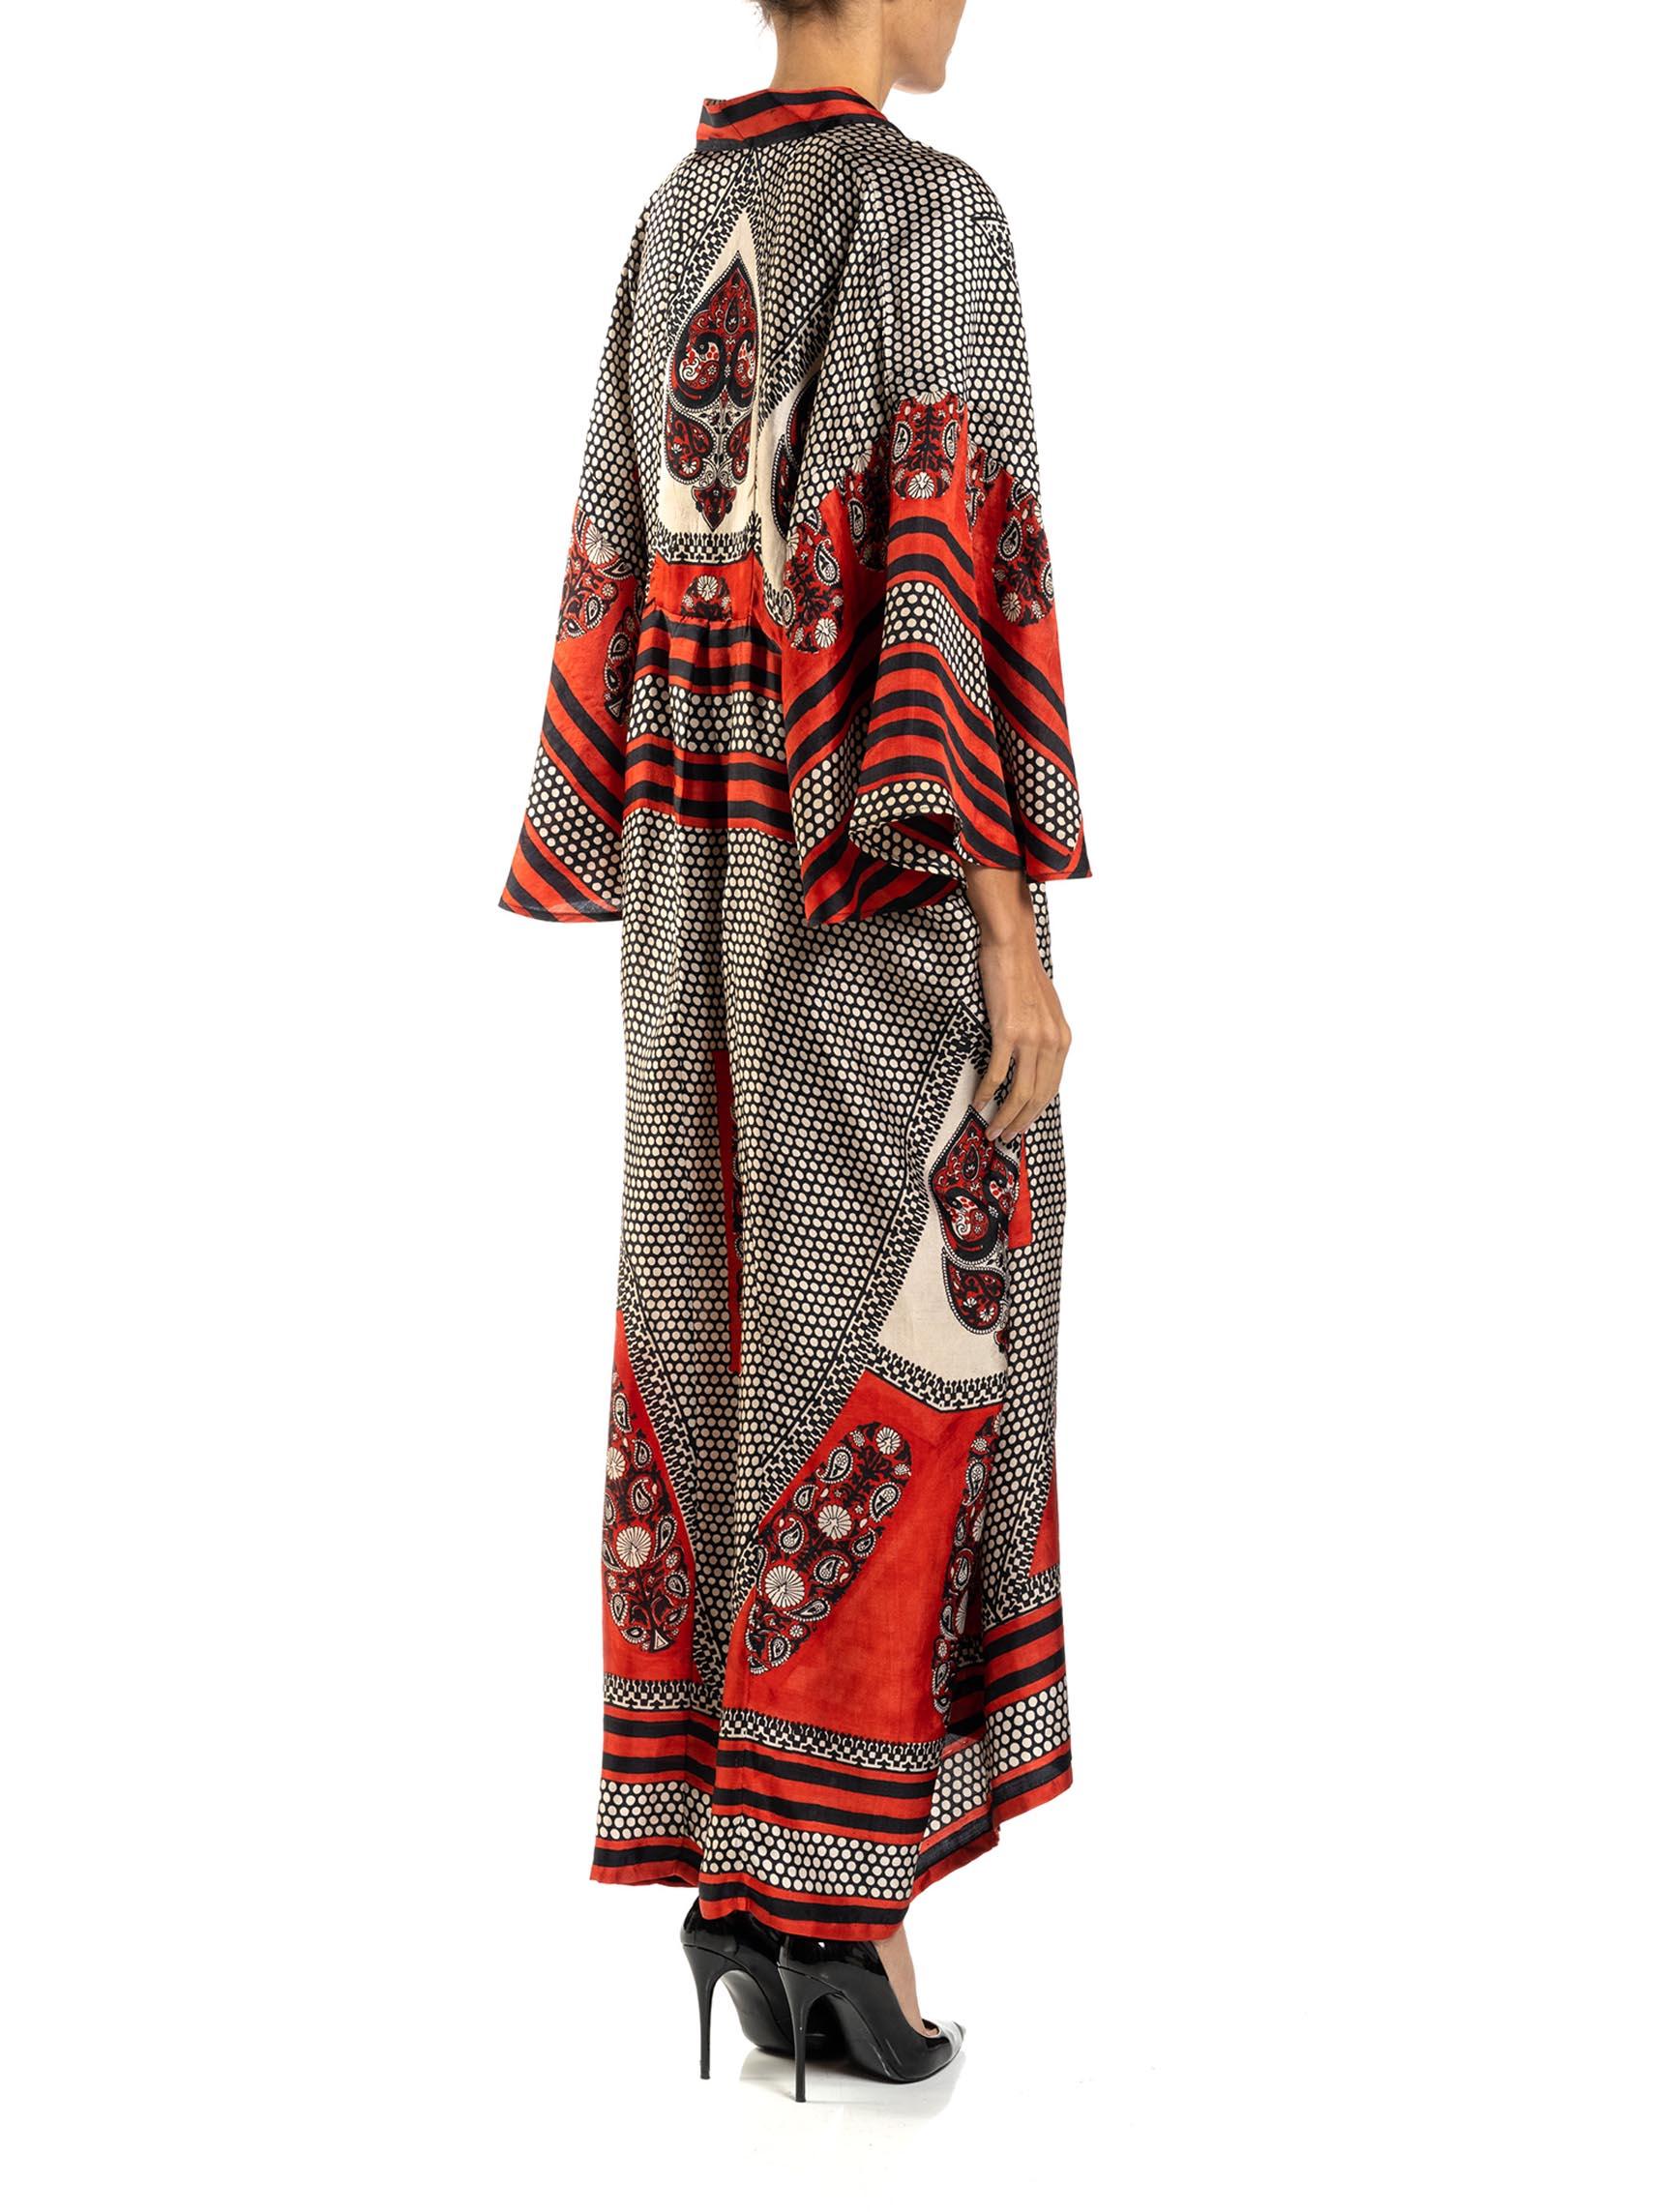 MORPHEW COLLECTION Red, Black & White Polka Dot Silk Kaftan Made From Vintage S 2